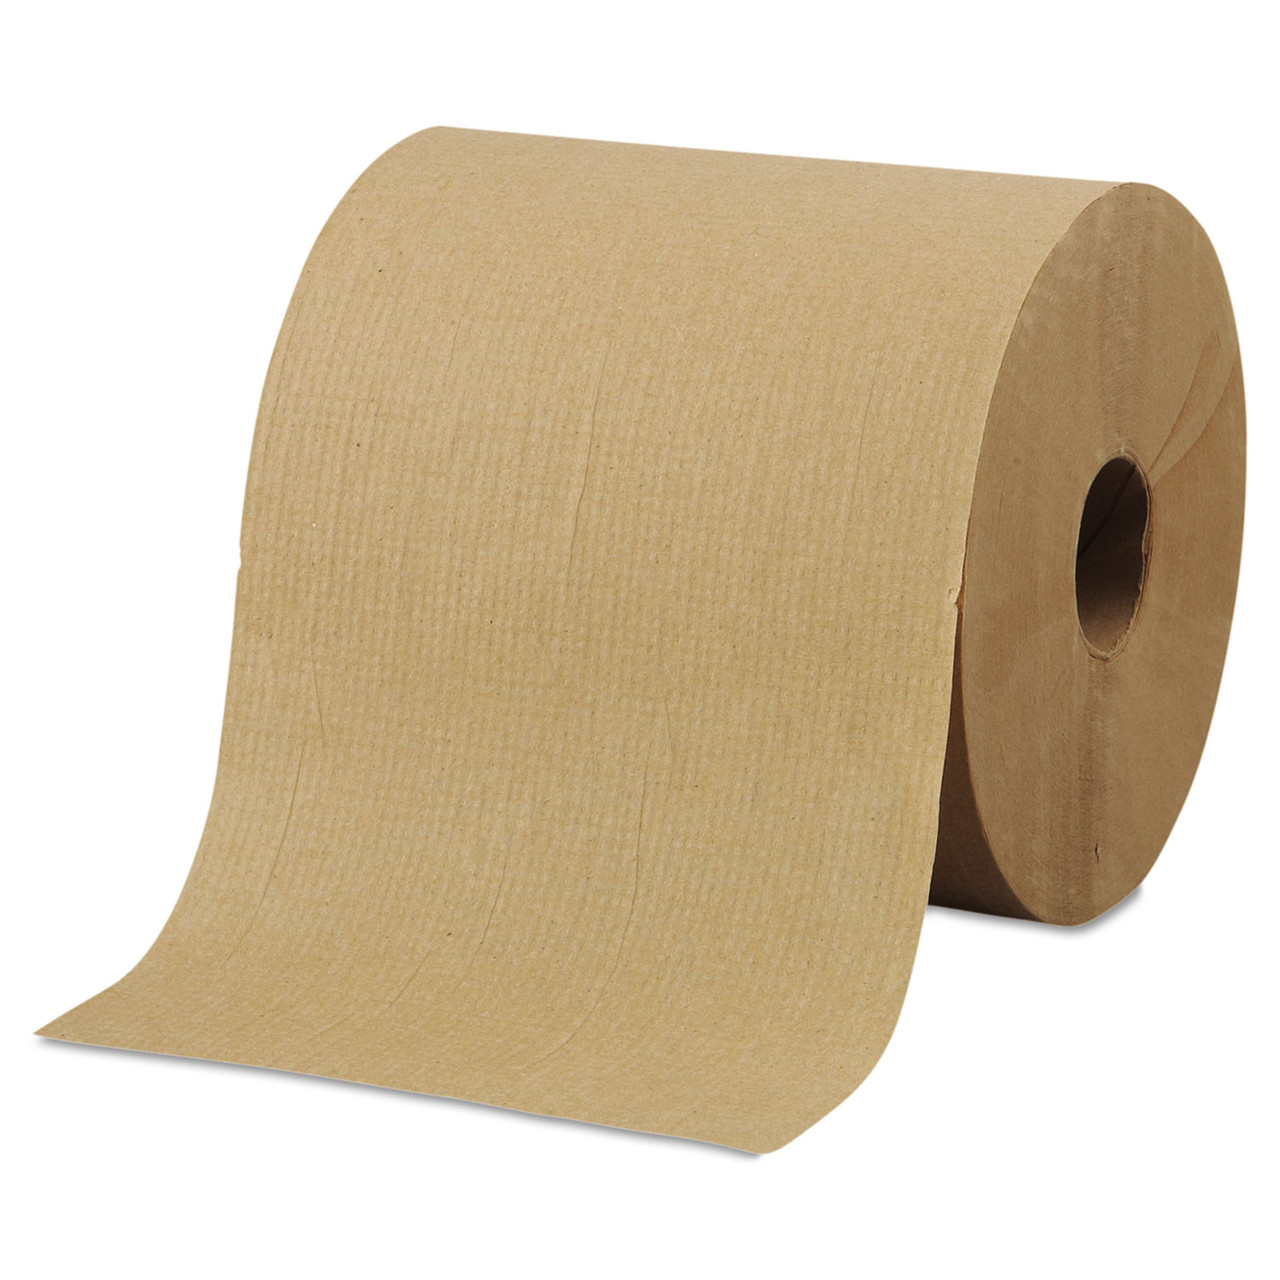 Morcon Hardwound Roll Towels, 8 x 800ft, Brown, 6 Rolls-carton